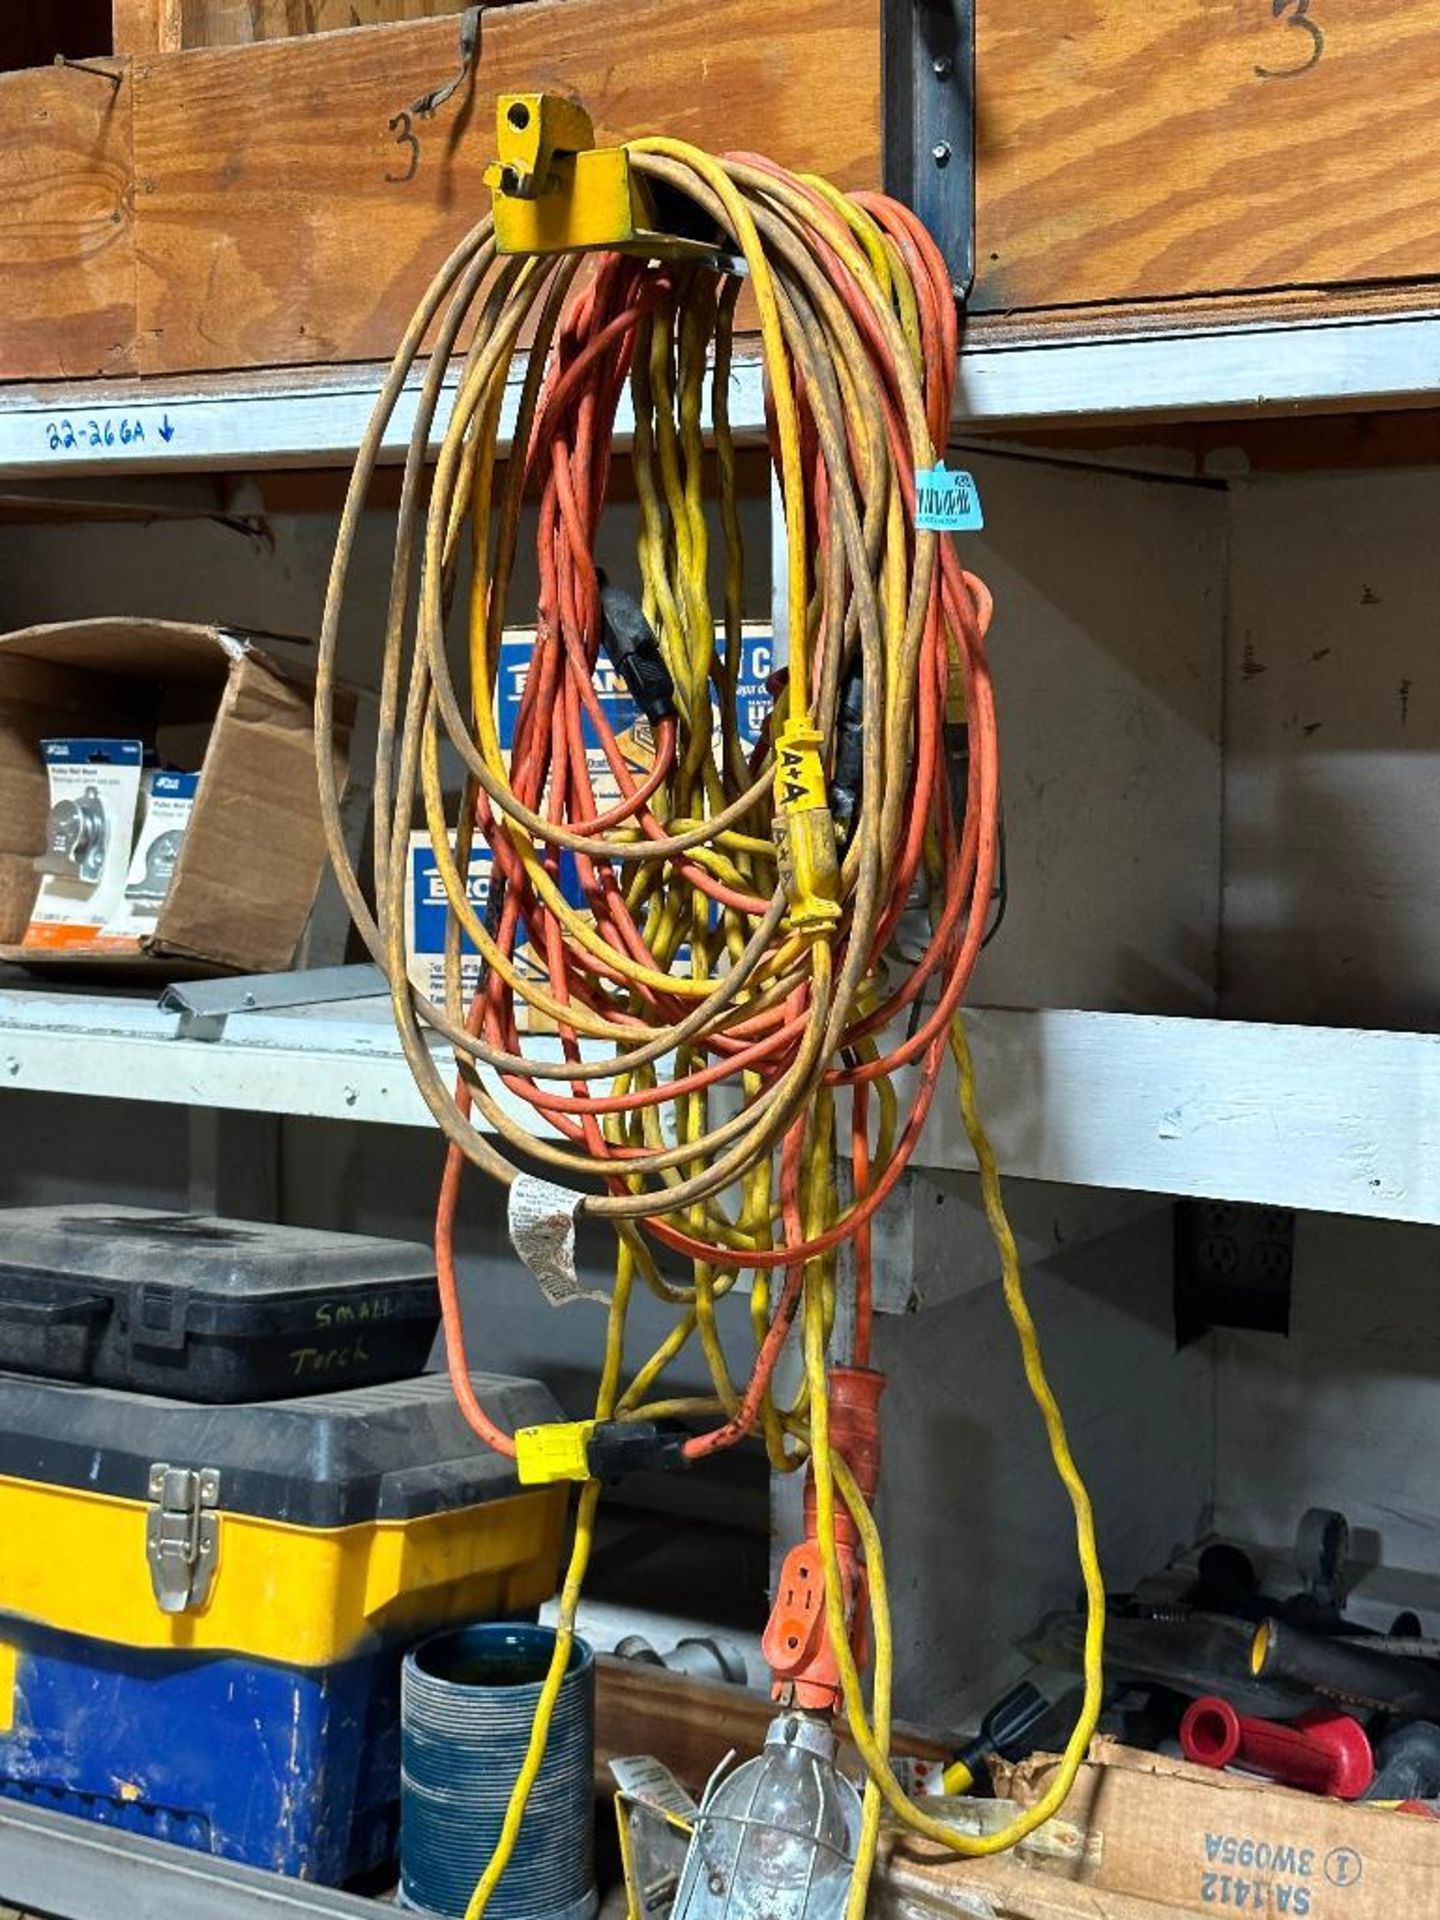 ASSORTED GROUP OF ELECTRICAL CABLES AND EXTENSION CORDS - Image 2 of 2